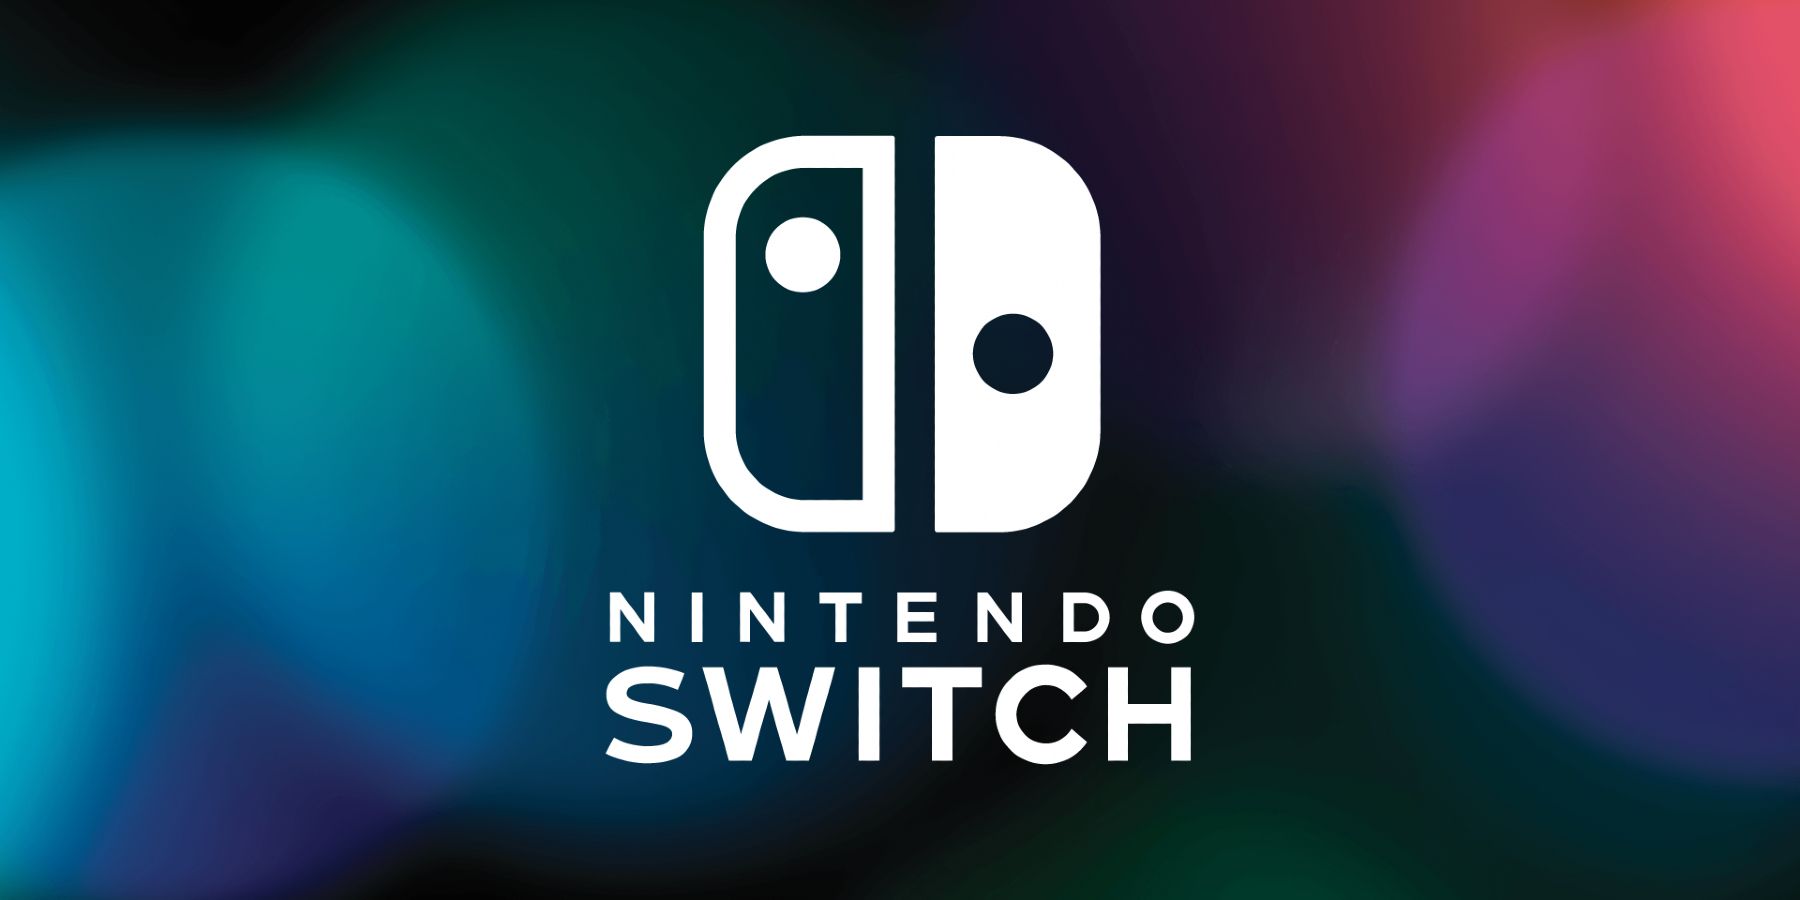 Nintendo Switch Game Release Schedule Confirmed & It's Not Exciting